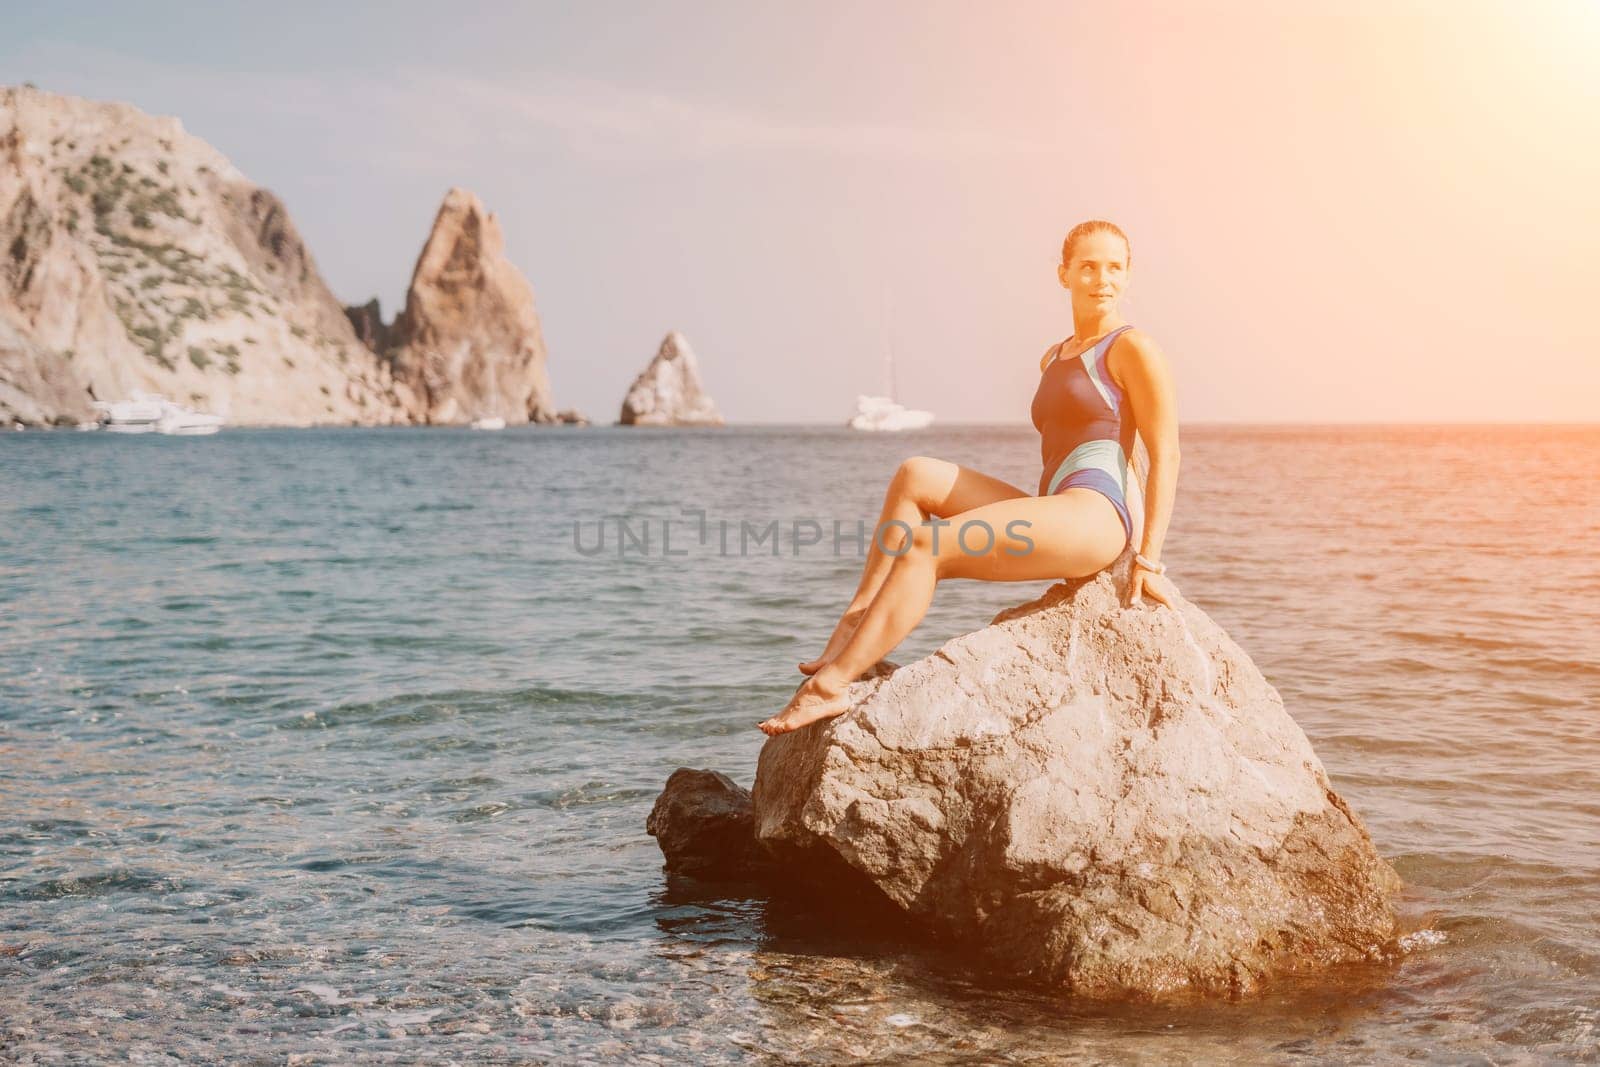 Woman travel sea. Happy tourist in blue swimwear takes a photo outdoors to capture memories. woman traveling and enjoying her surroundings on the beach, with volcanic mountains in the background. by panophotograph